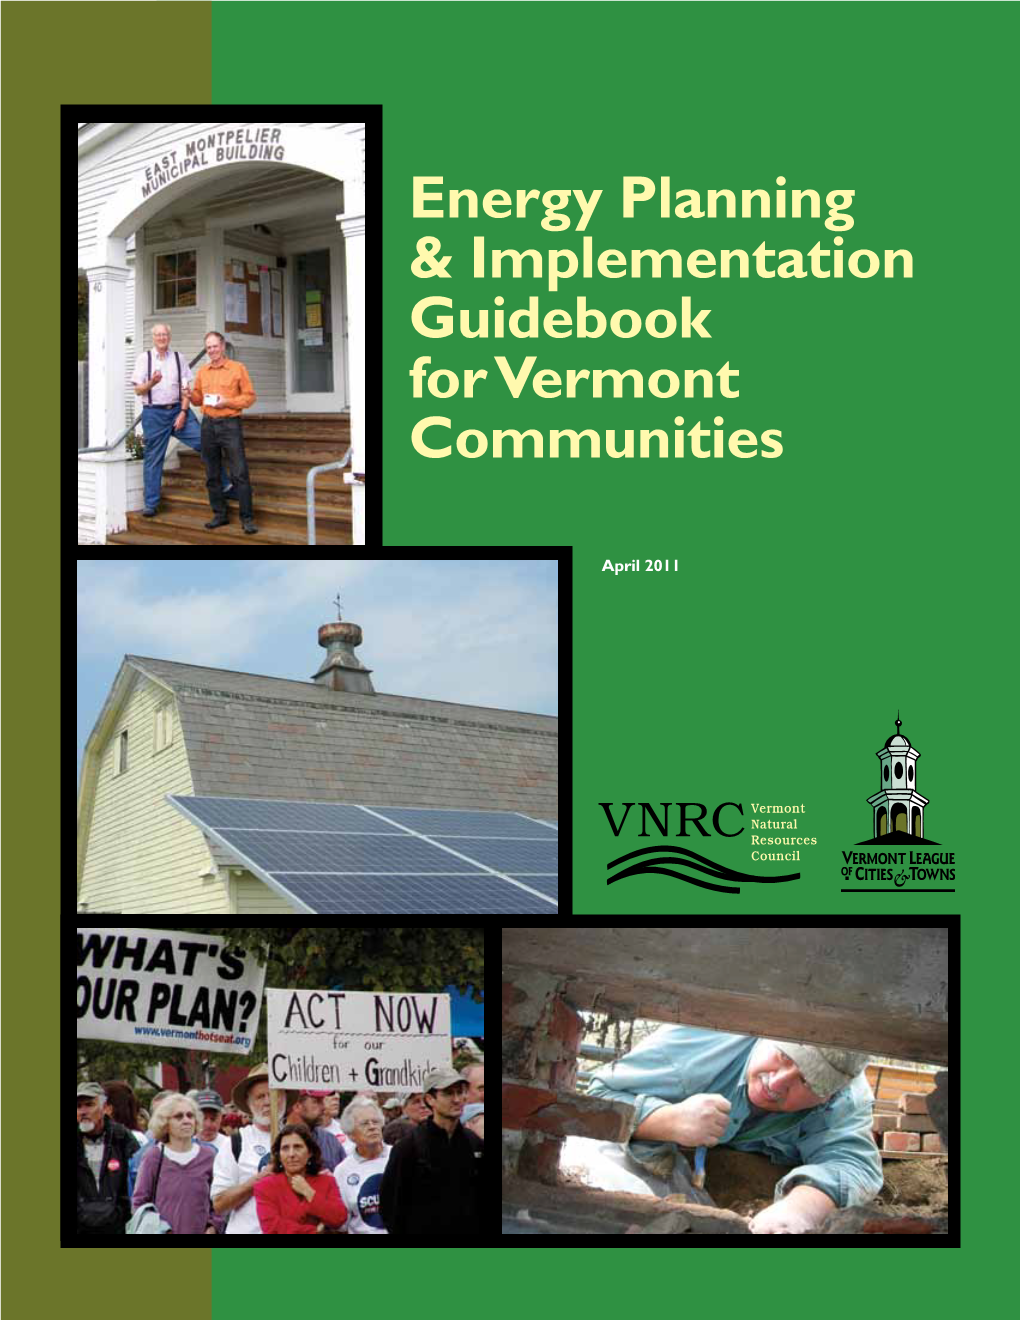 Energy Planning & Implementation Guidebook for Vermont Communities